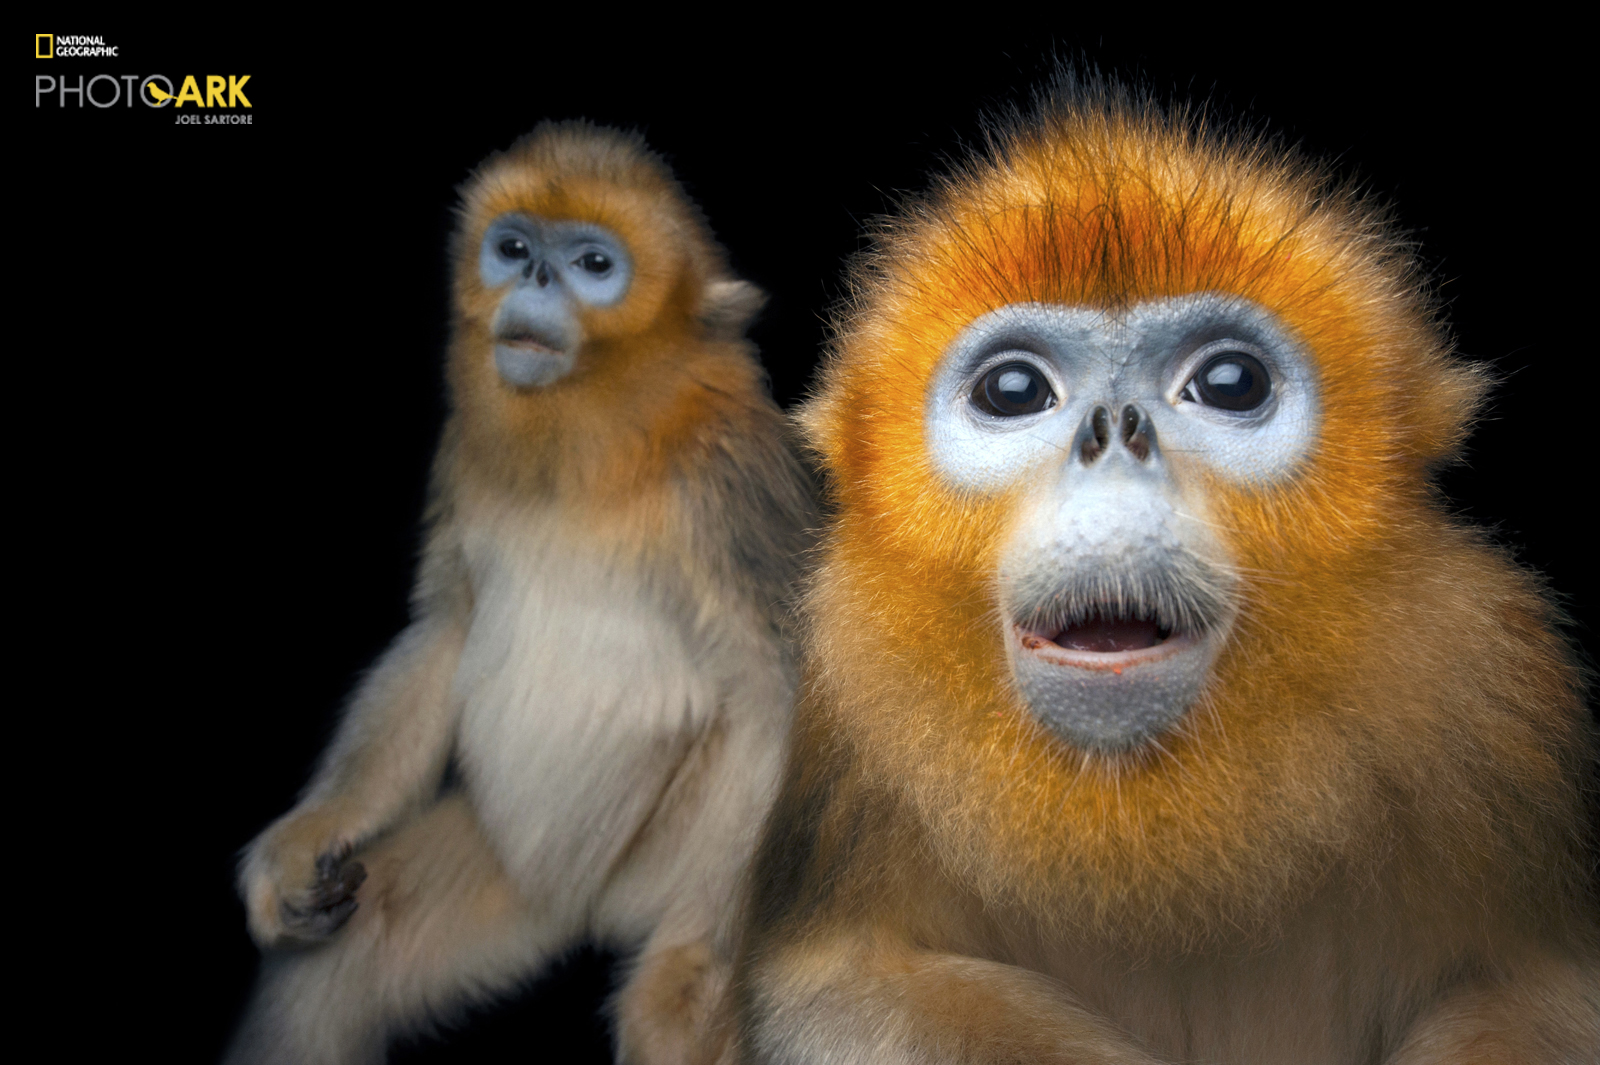 Portrait of Golden Snub-nosed Monkey from Joel Sartore's Photo Ark project